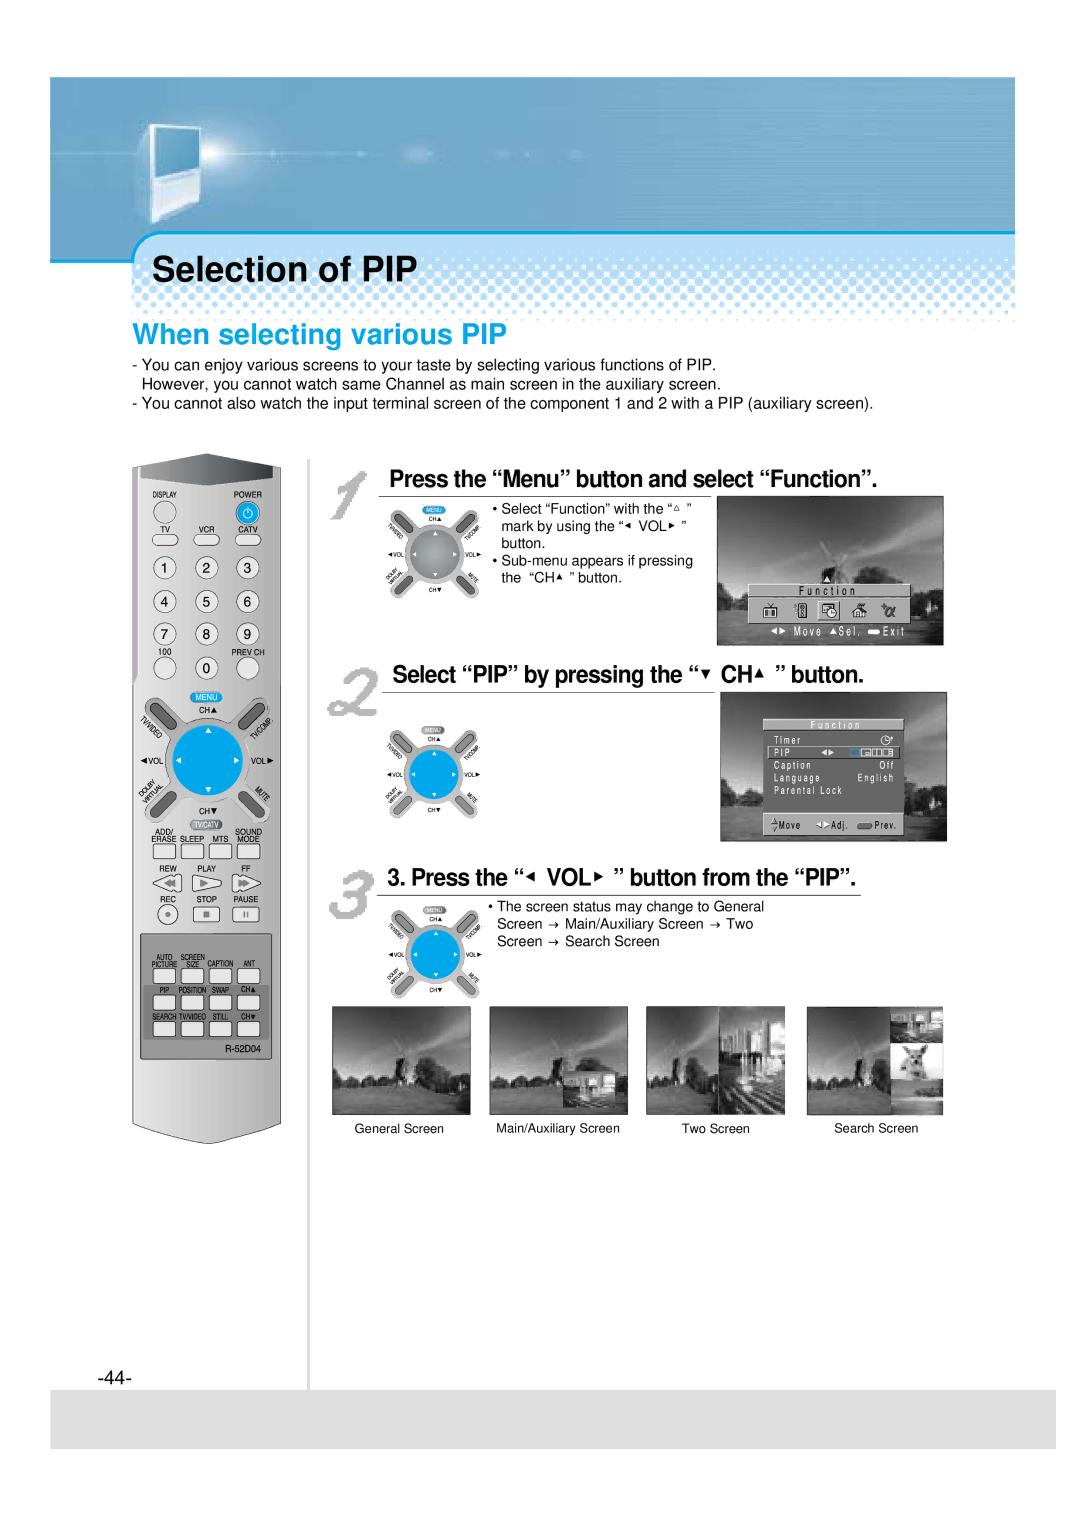 Daewoo 5510CRA, DSJ-4710CRA Selection of PIP, When selecting various PIP, Press the Menu button and select Function 